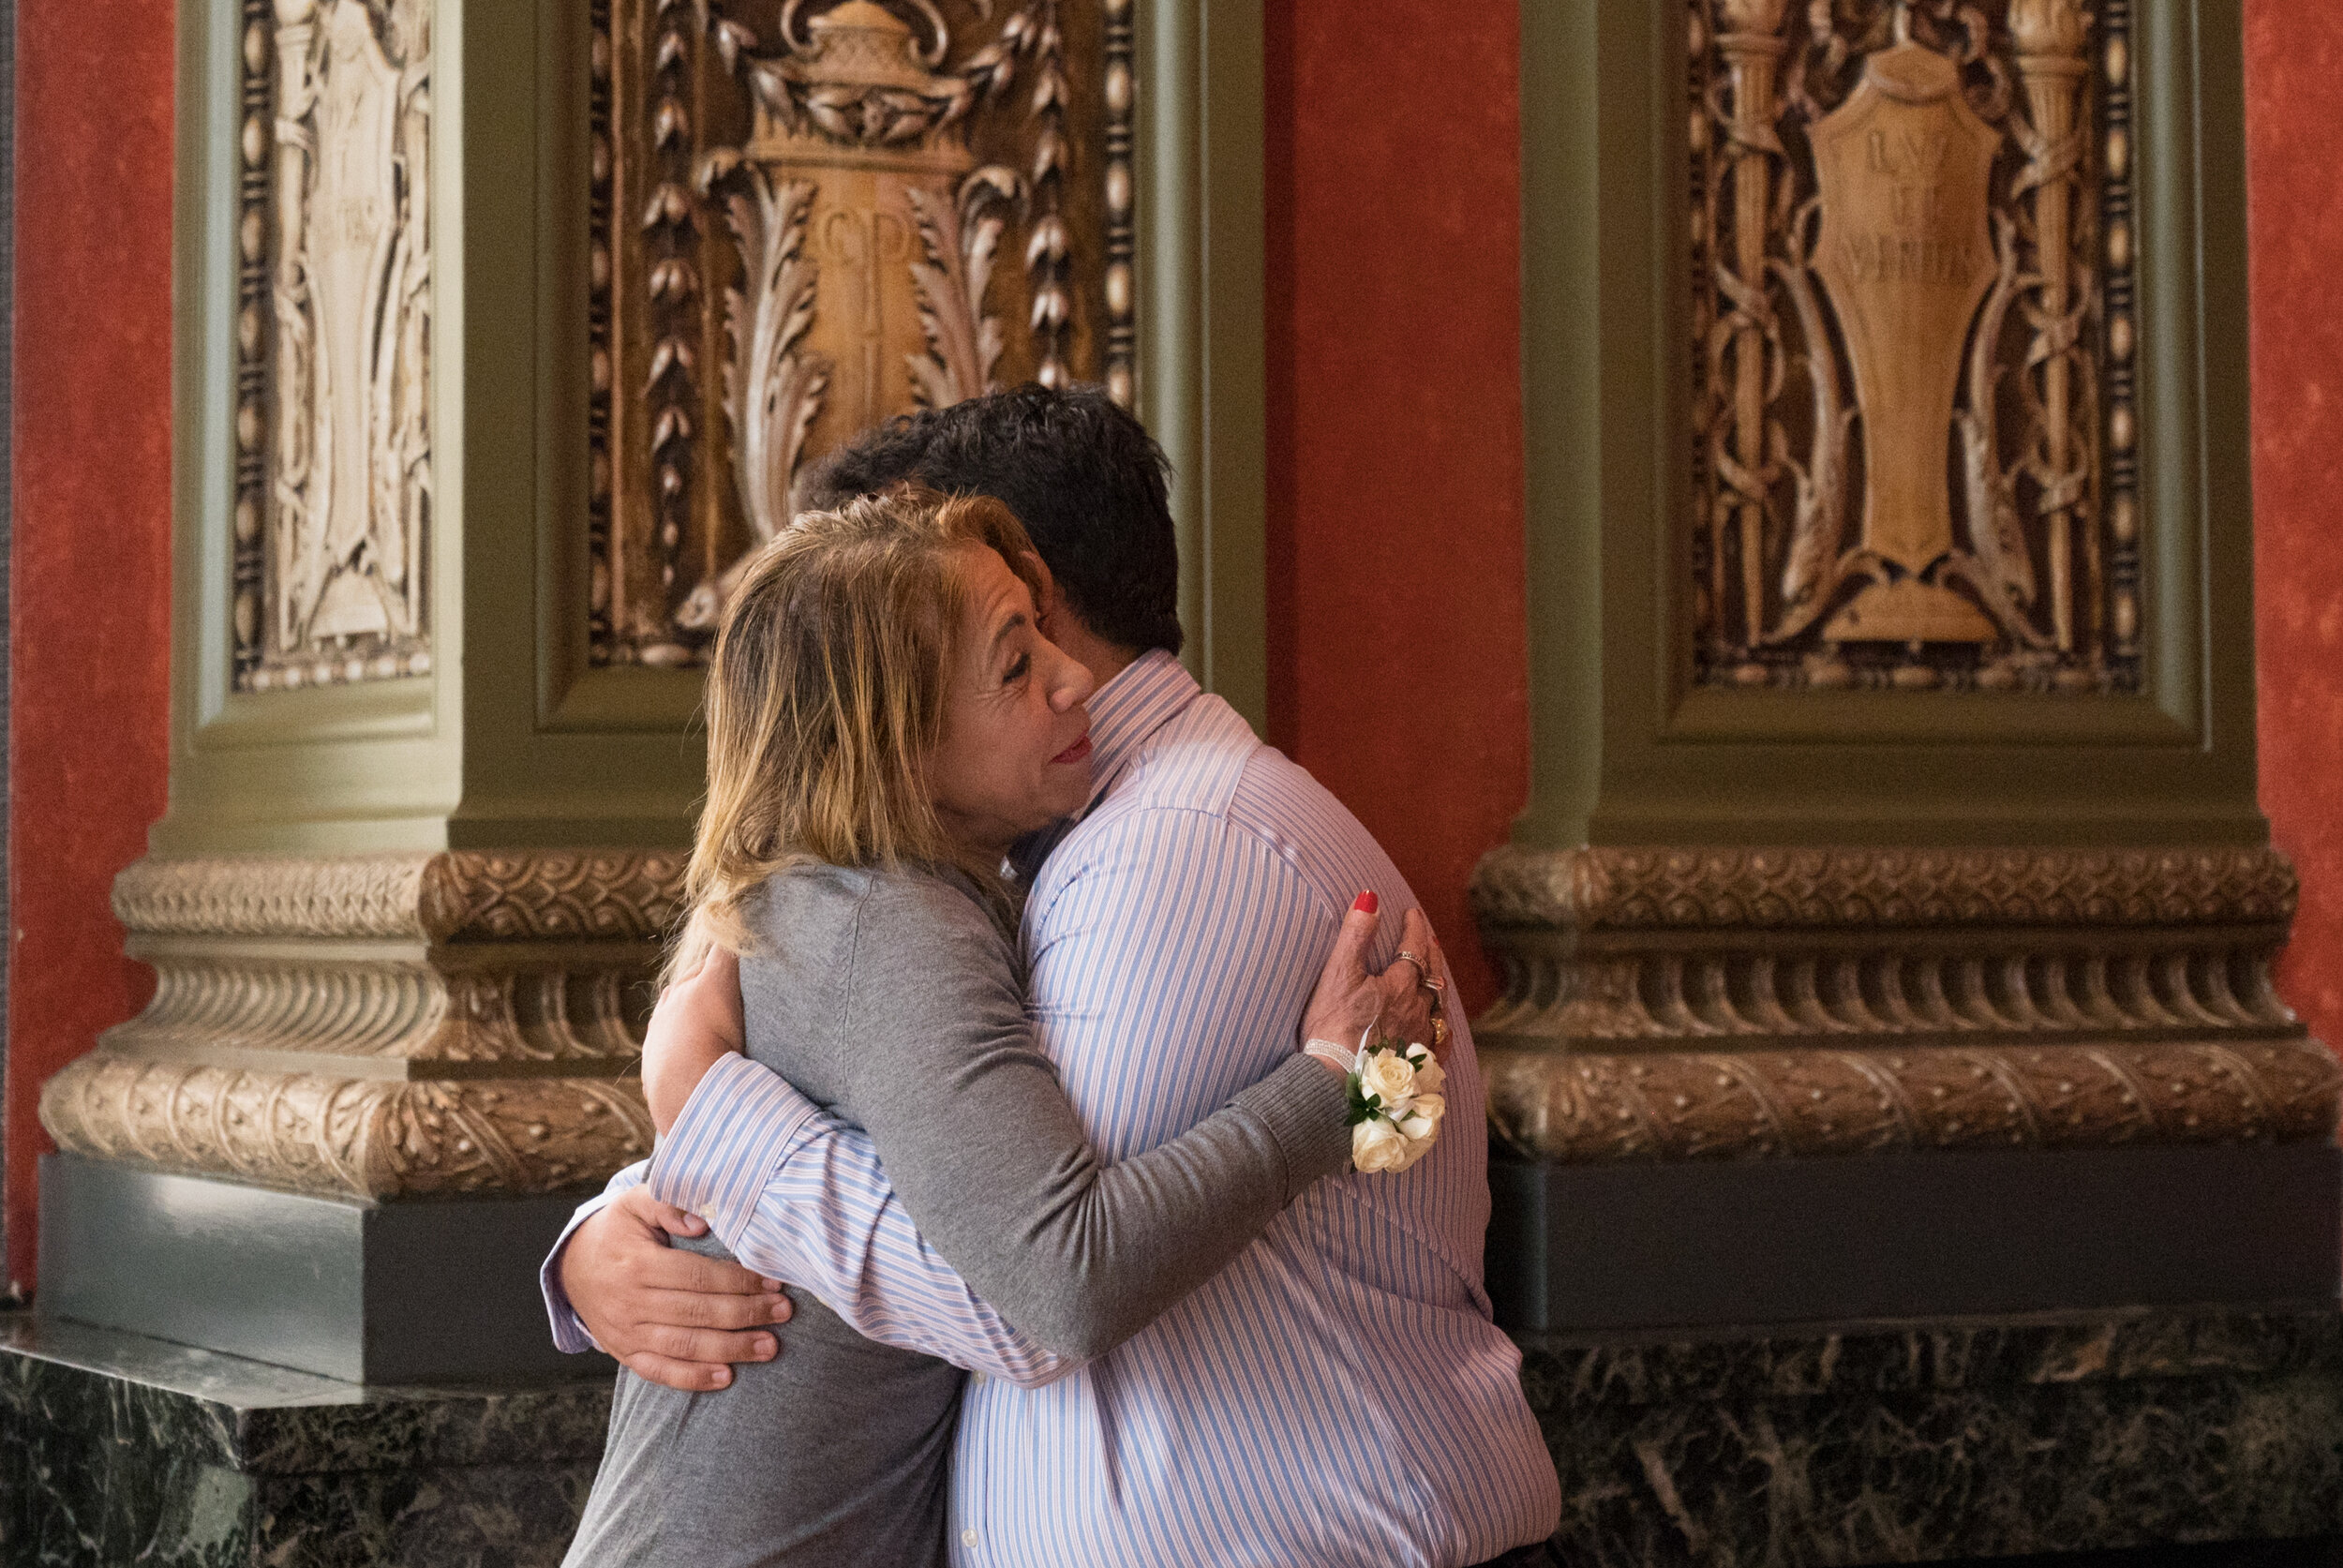 Intimate Winter Elopement with Portraits at the Chicago Cultural Center by Creative M Weddings